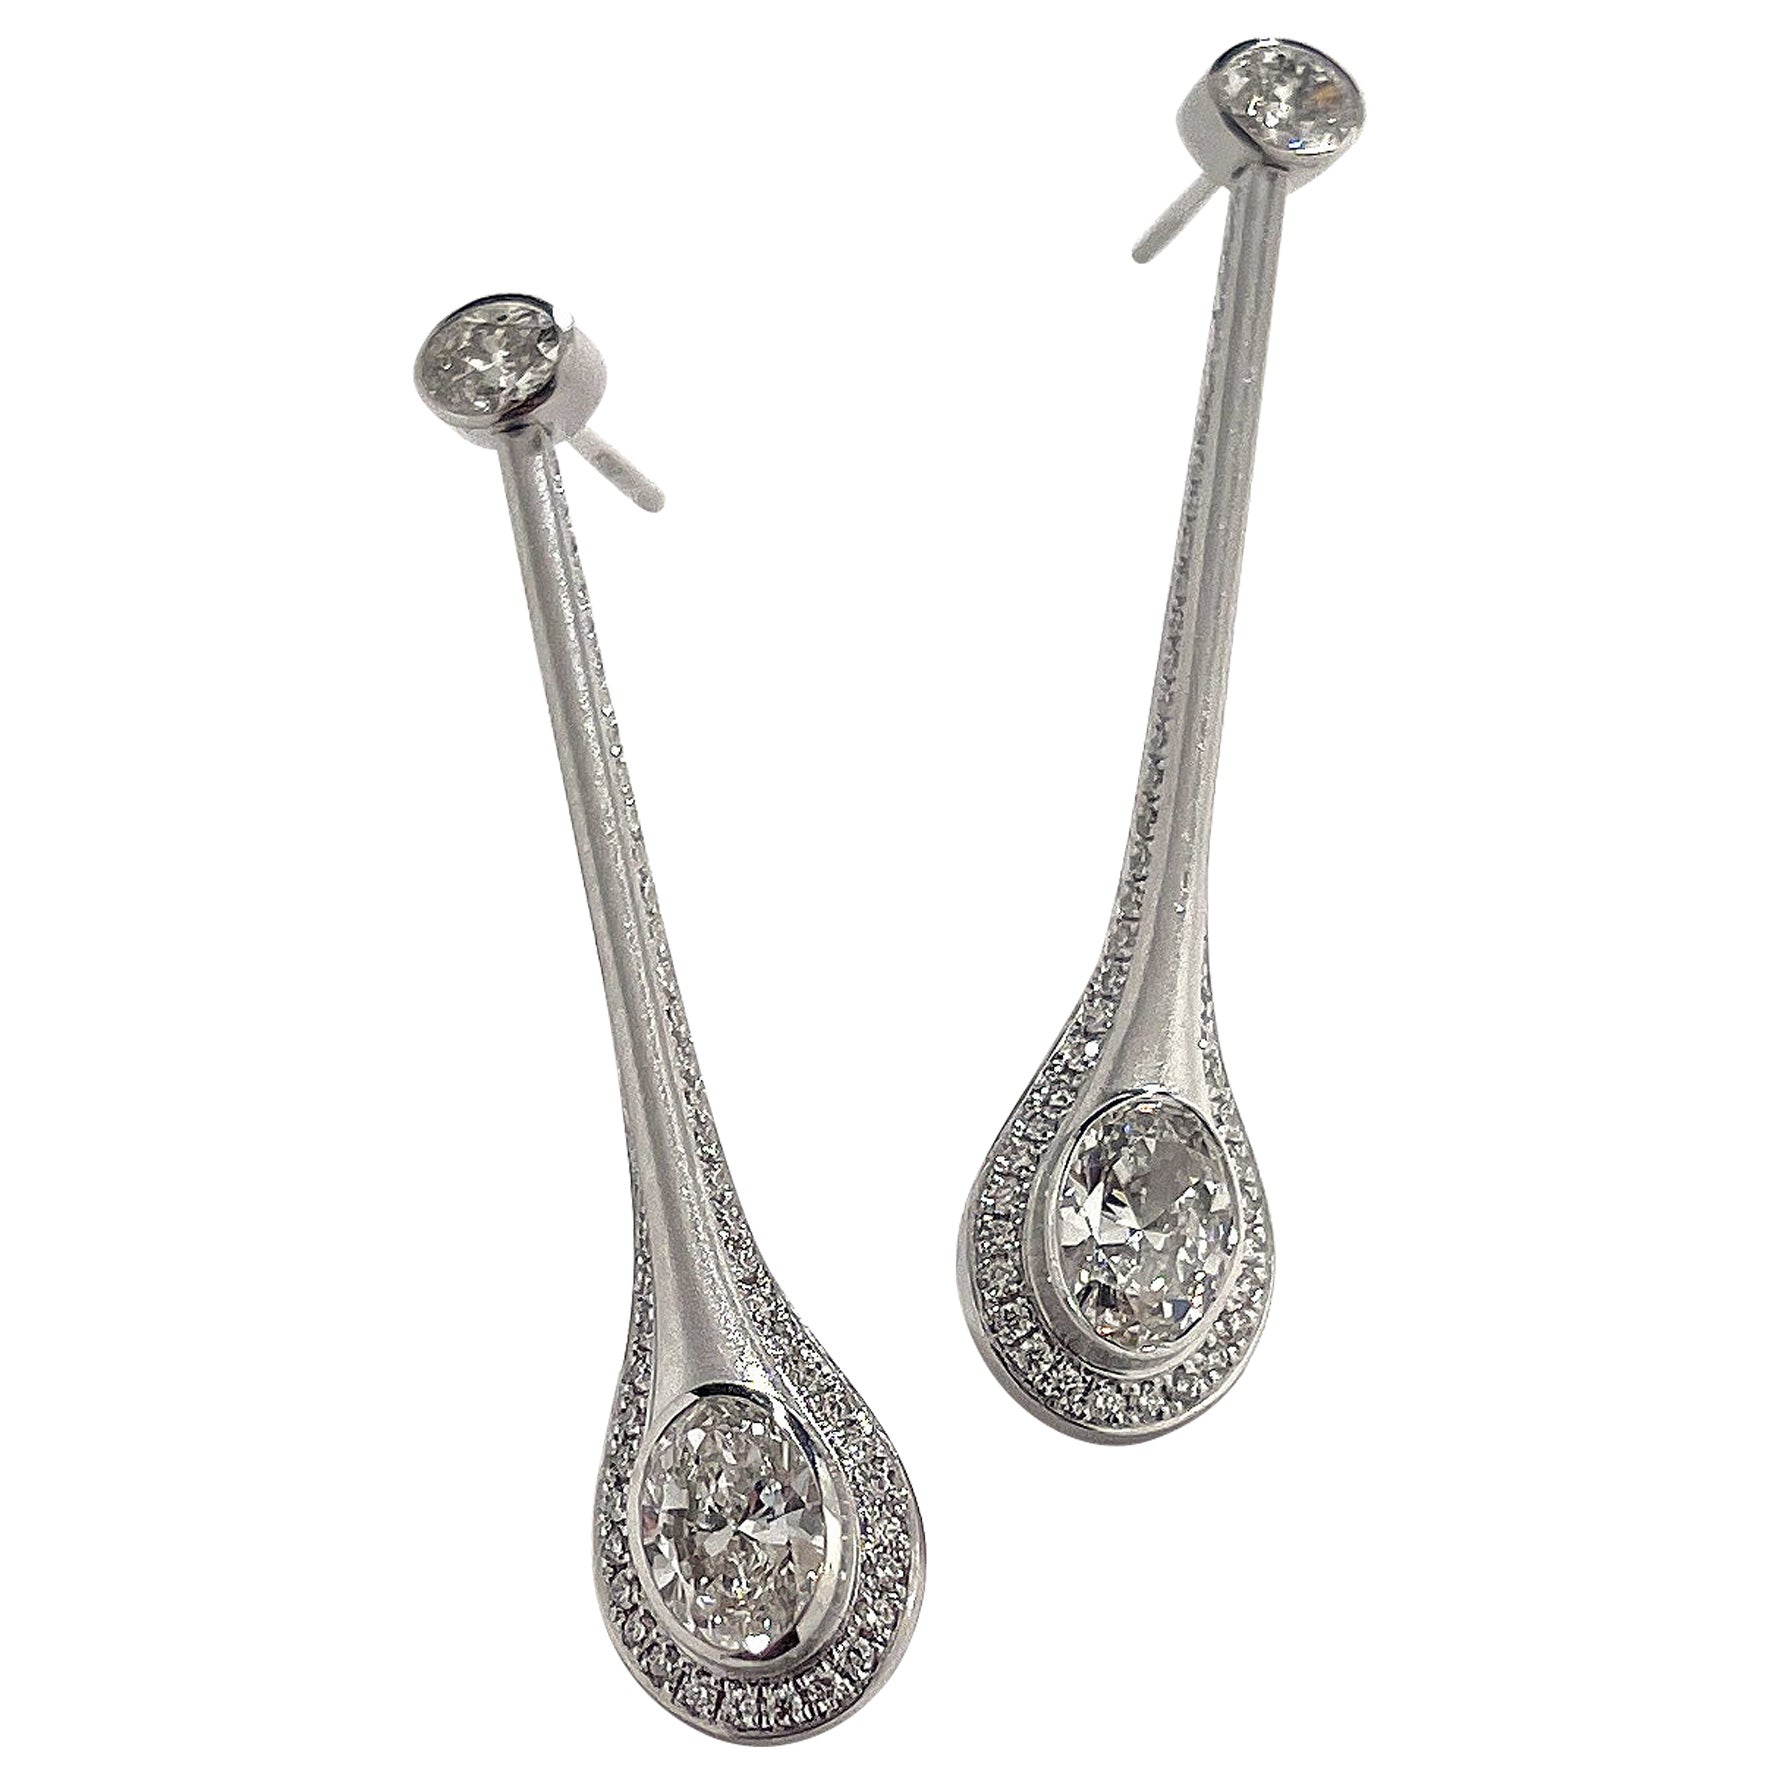 Geoffrey Good Galaxy "Long Comet" Natural Diamond Earrings in 18k White Gold For Sale